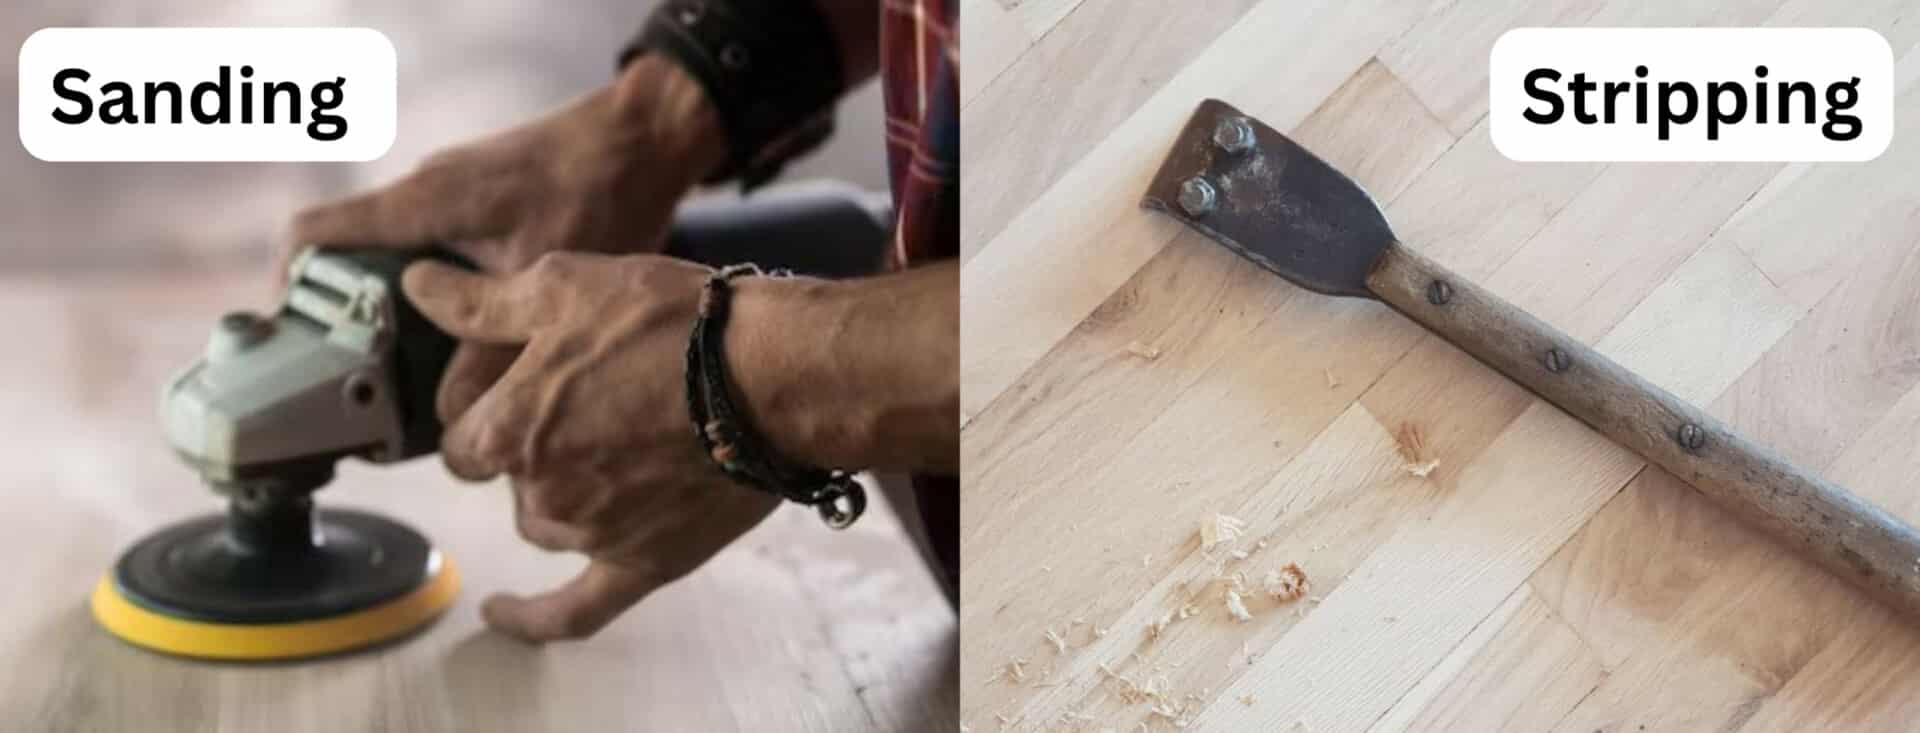 Comparison of sanding with an orbital sander versus stripping with a paint scraper on wood.